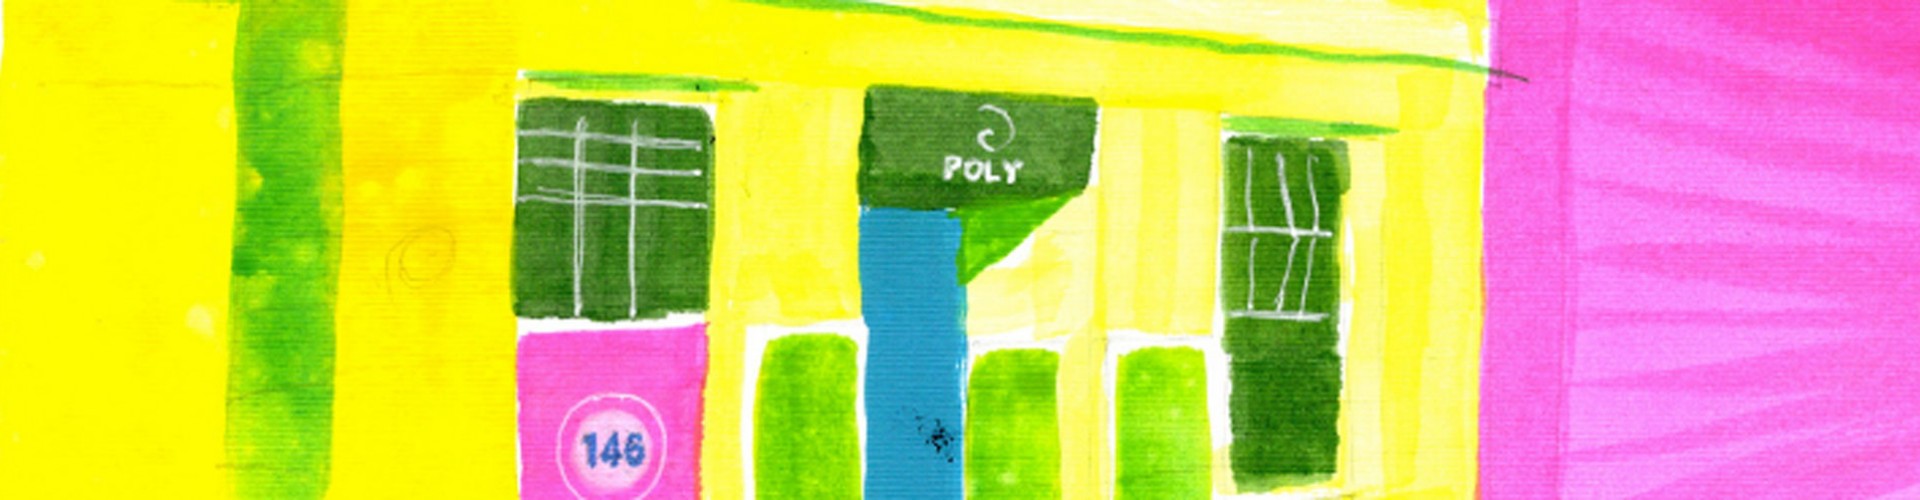 detail from colourful painting for The Poly Falmouth